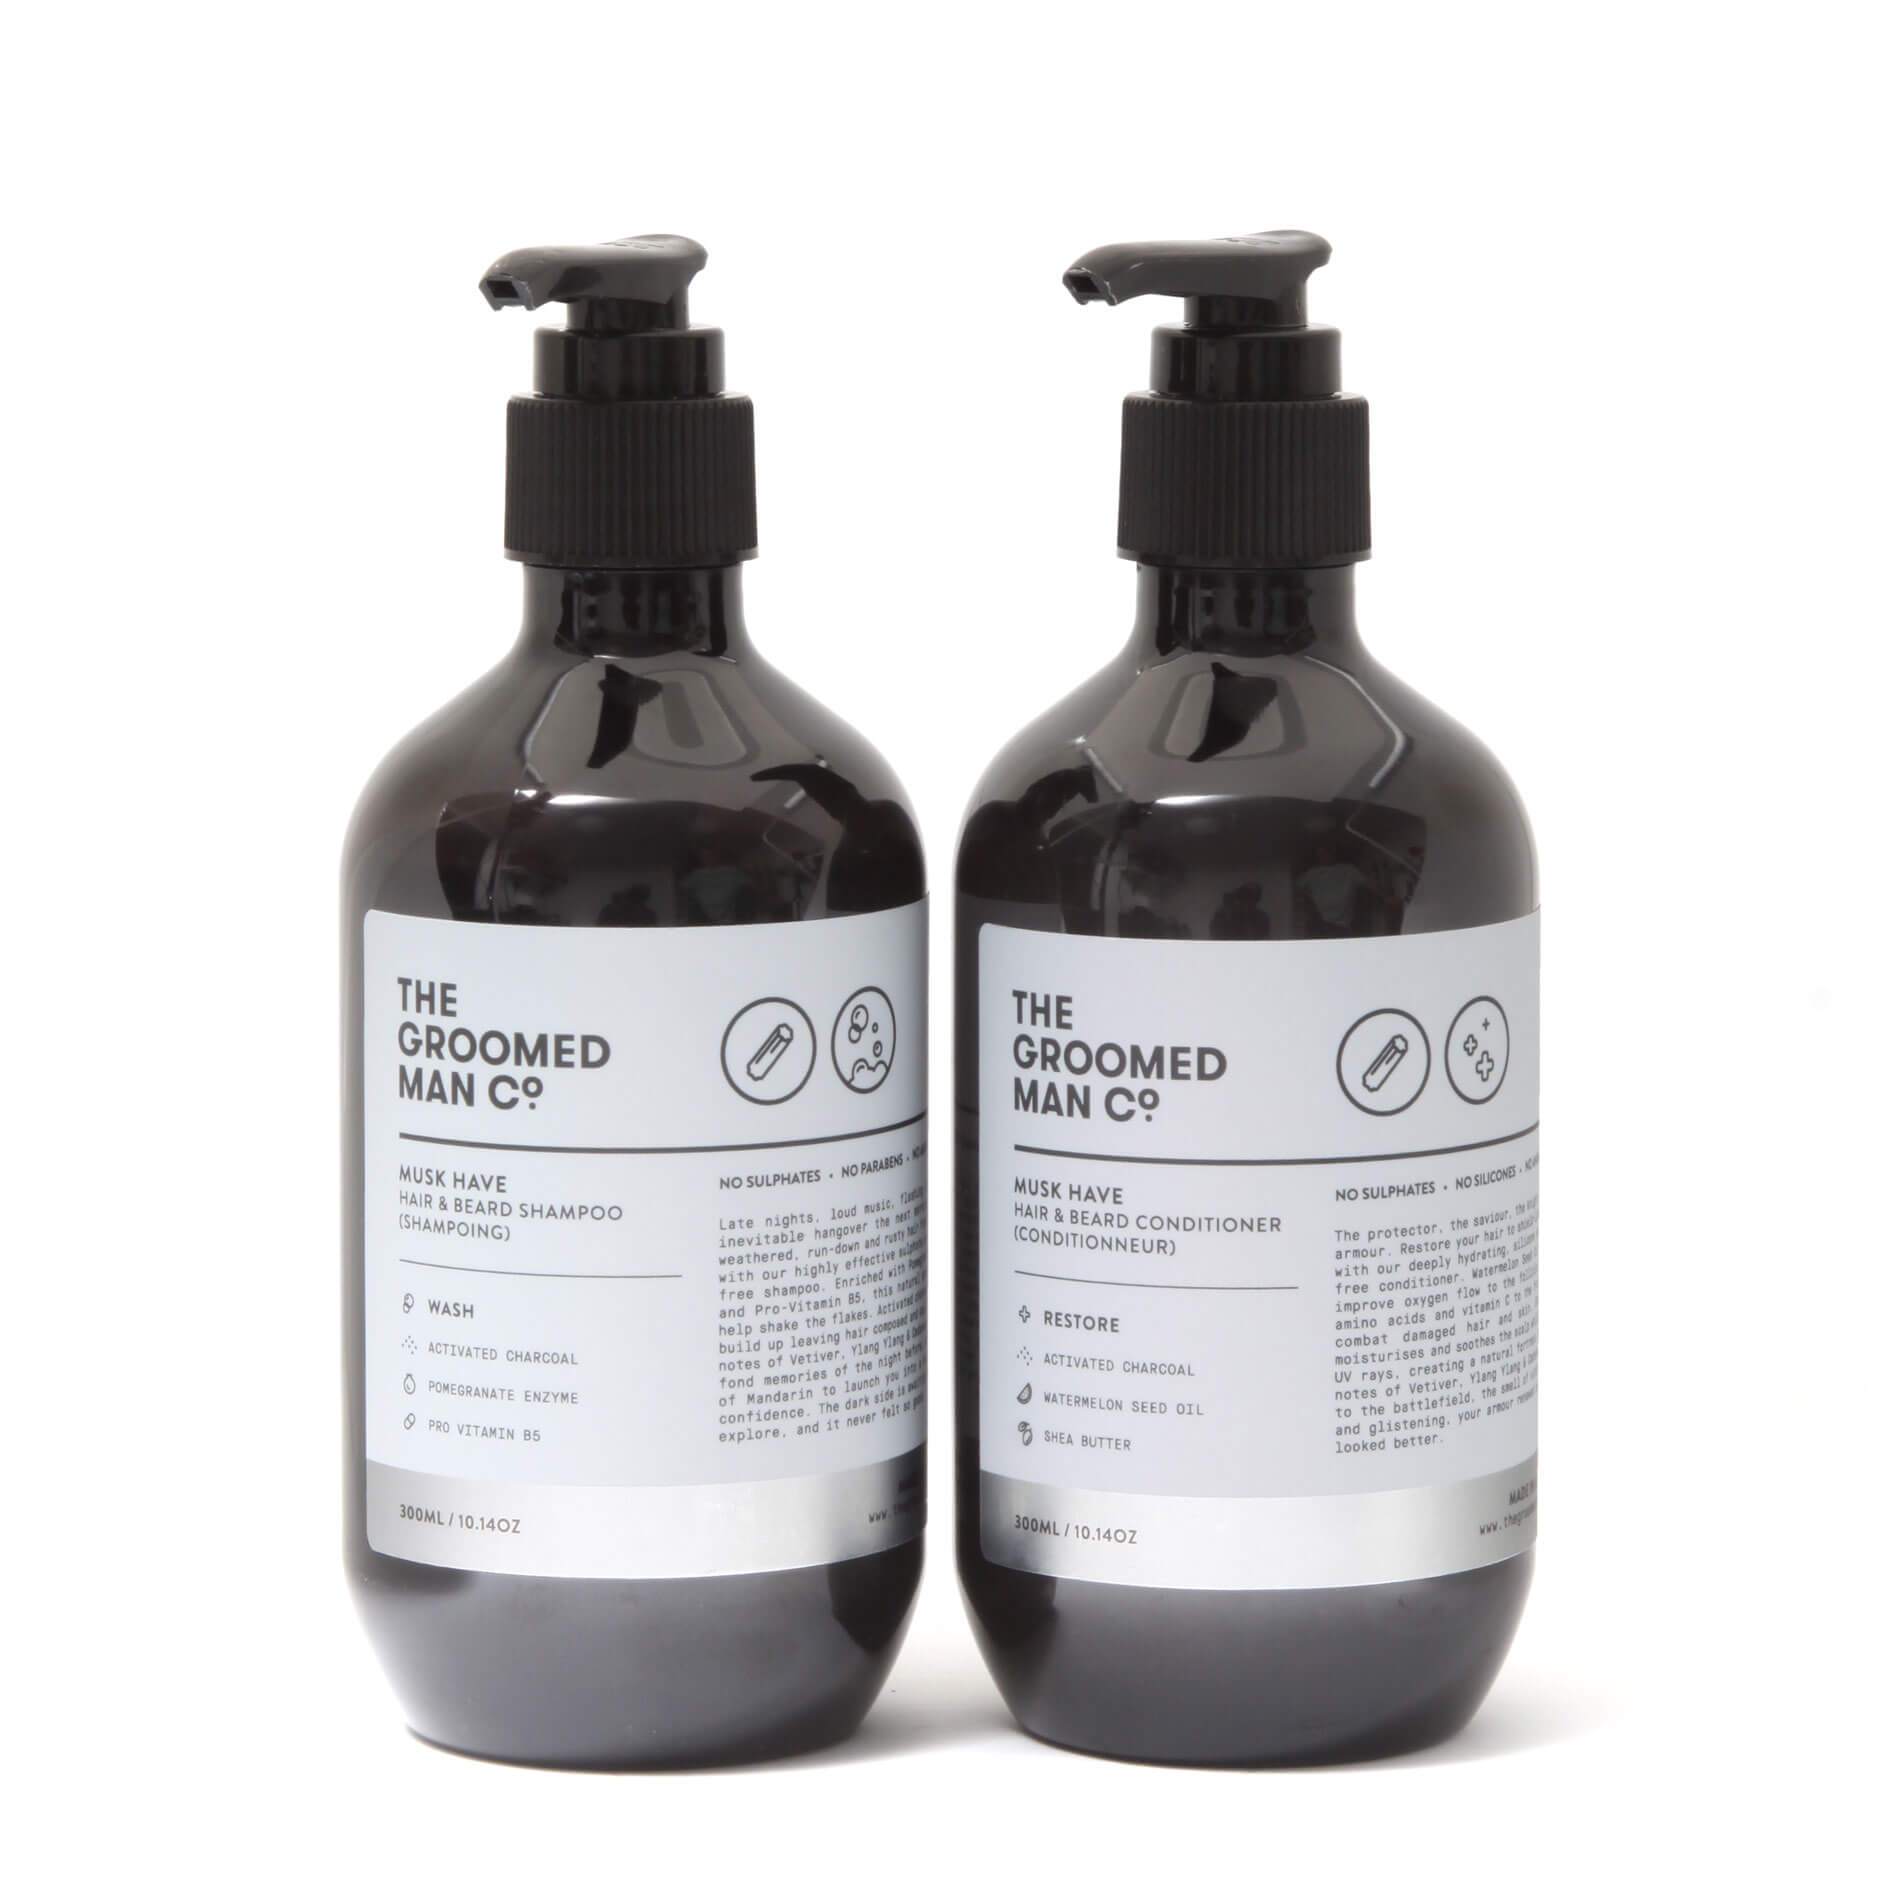 The Groomed Man Co Musk Have Shampoo & Conditioner Duo